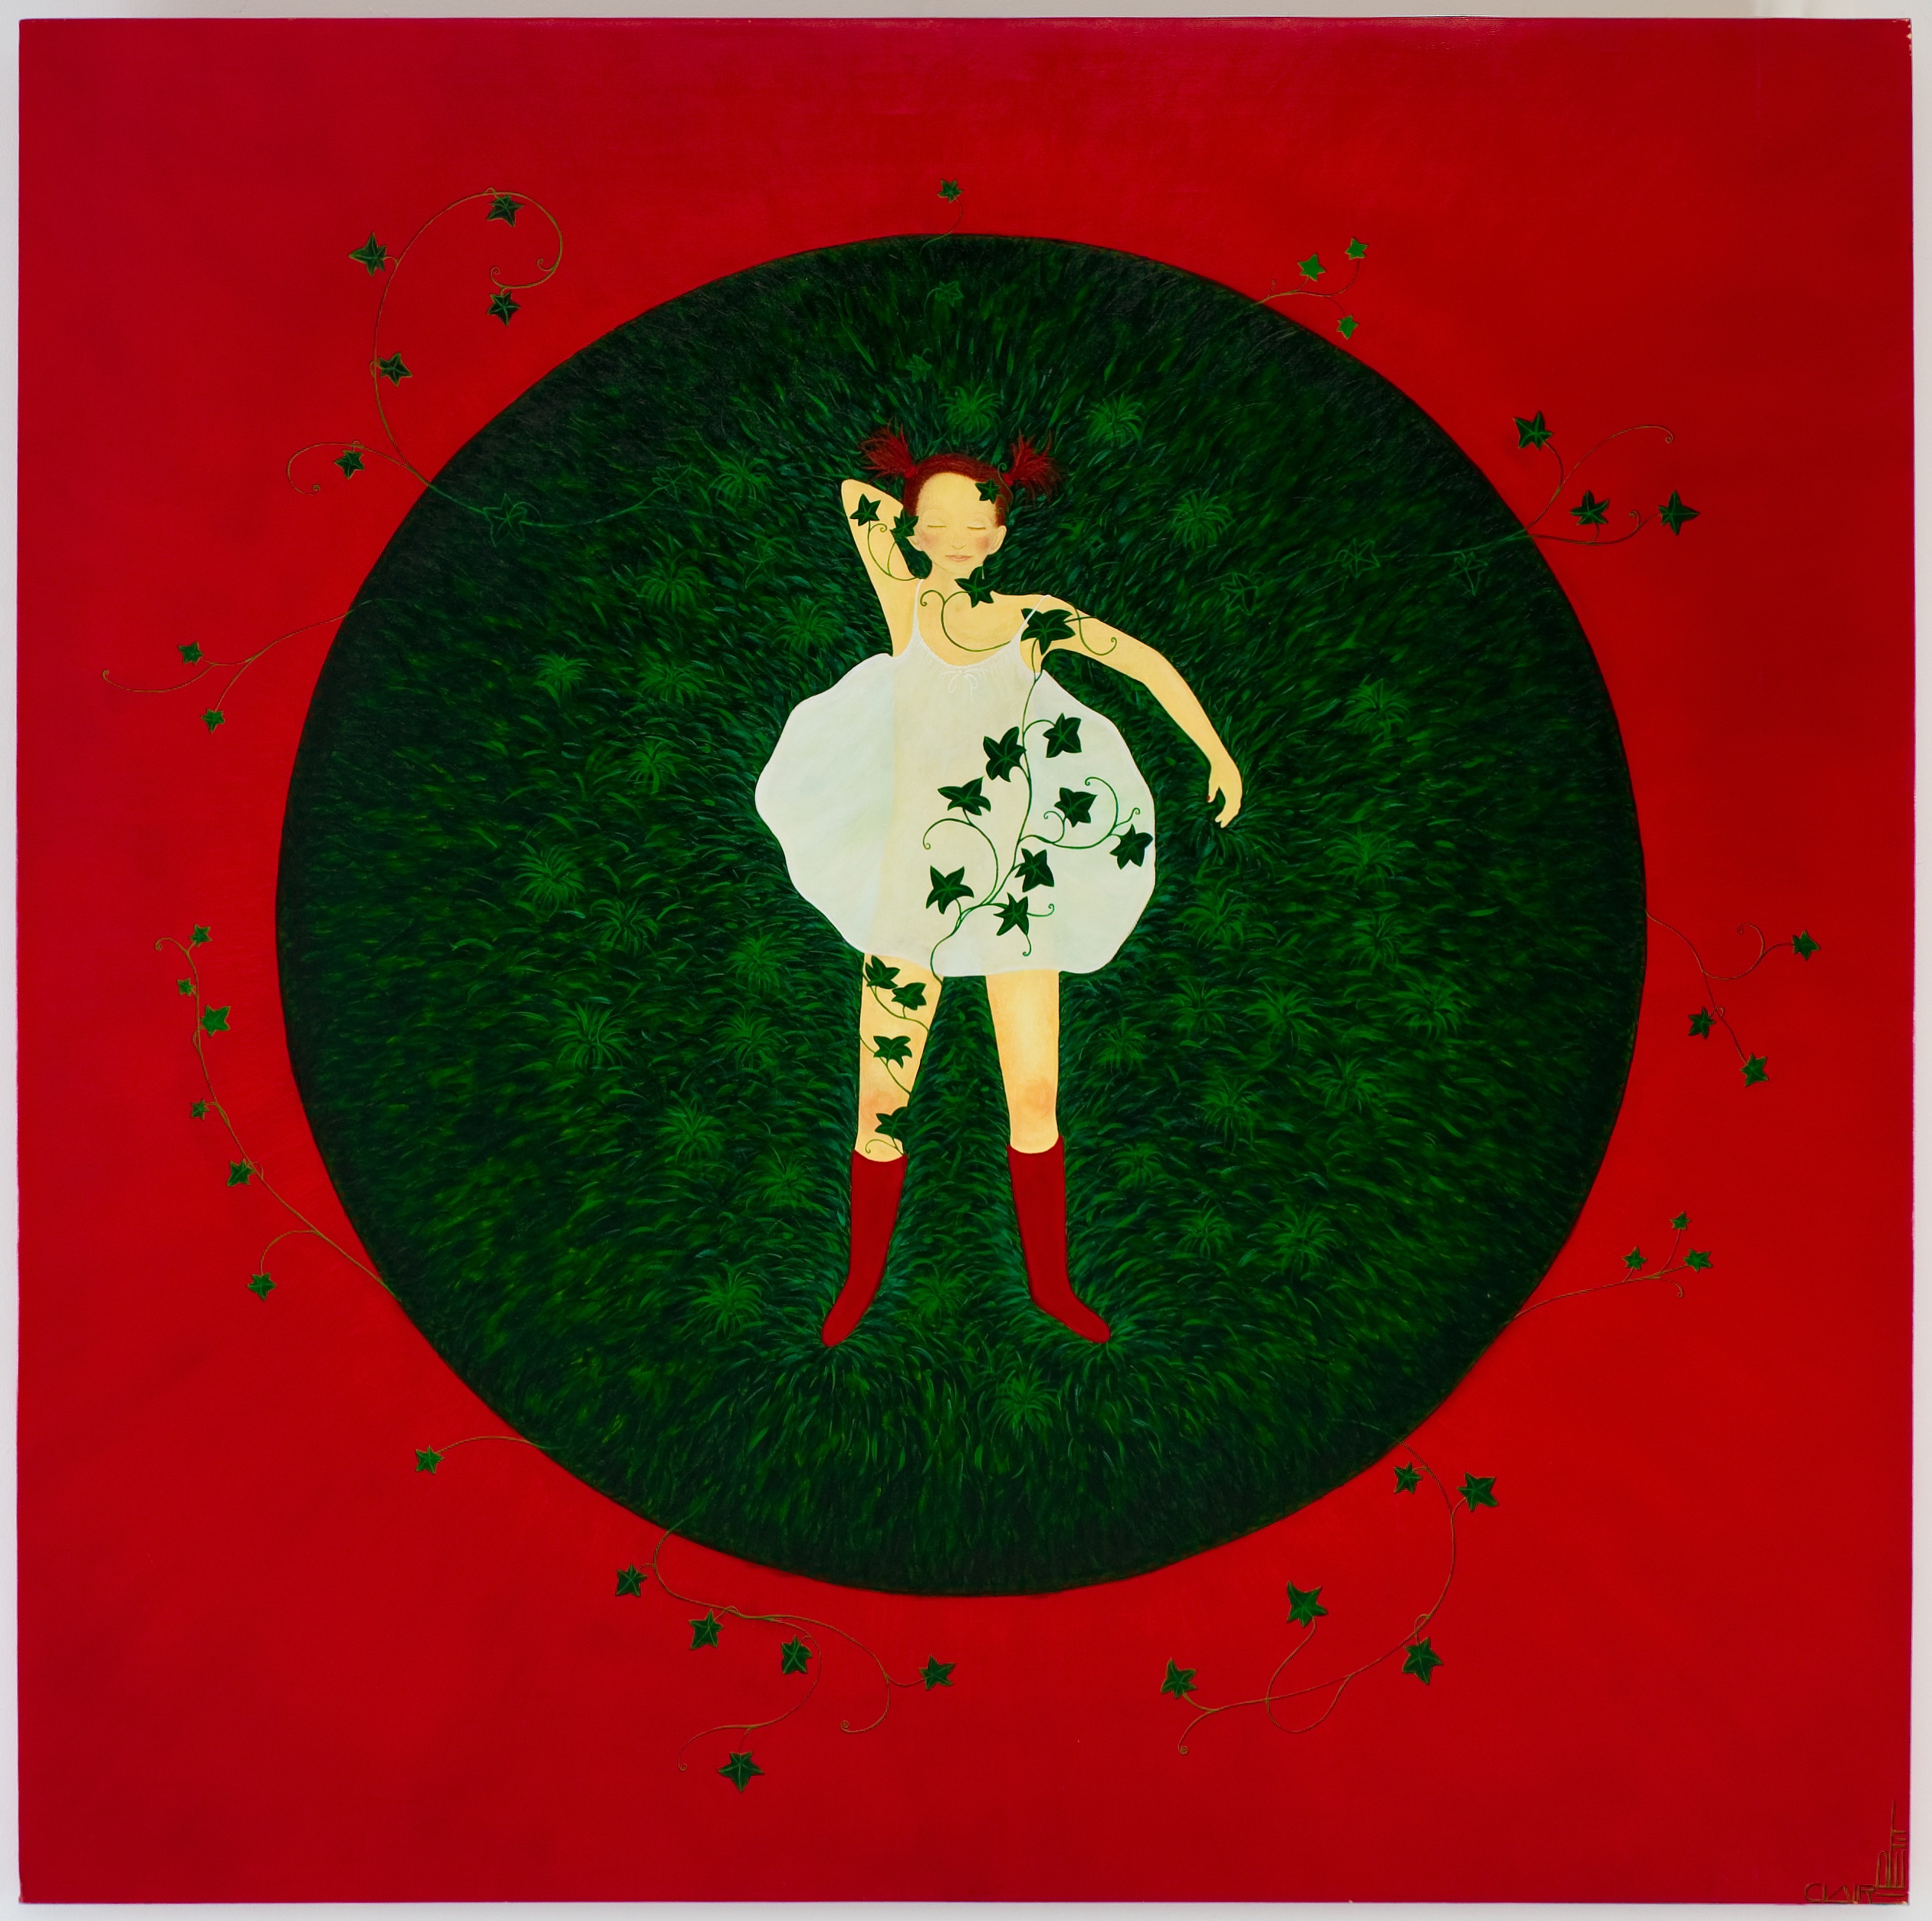 Claire Petit: 'Awaiting unconsciousness', 2011 Oil Painting, Children. Oil Painting on canvas.  A little girl is sleeping in a green circle.  A climbing ivy is growing on her leg.  The background is a vivid red.A limited deluxe art print is available as well, signed and numbered reproduction 24 x 24 comes with a Certificate of Authenticity for ...